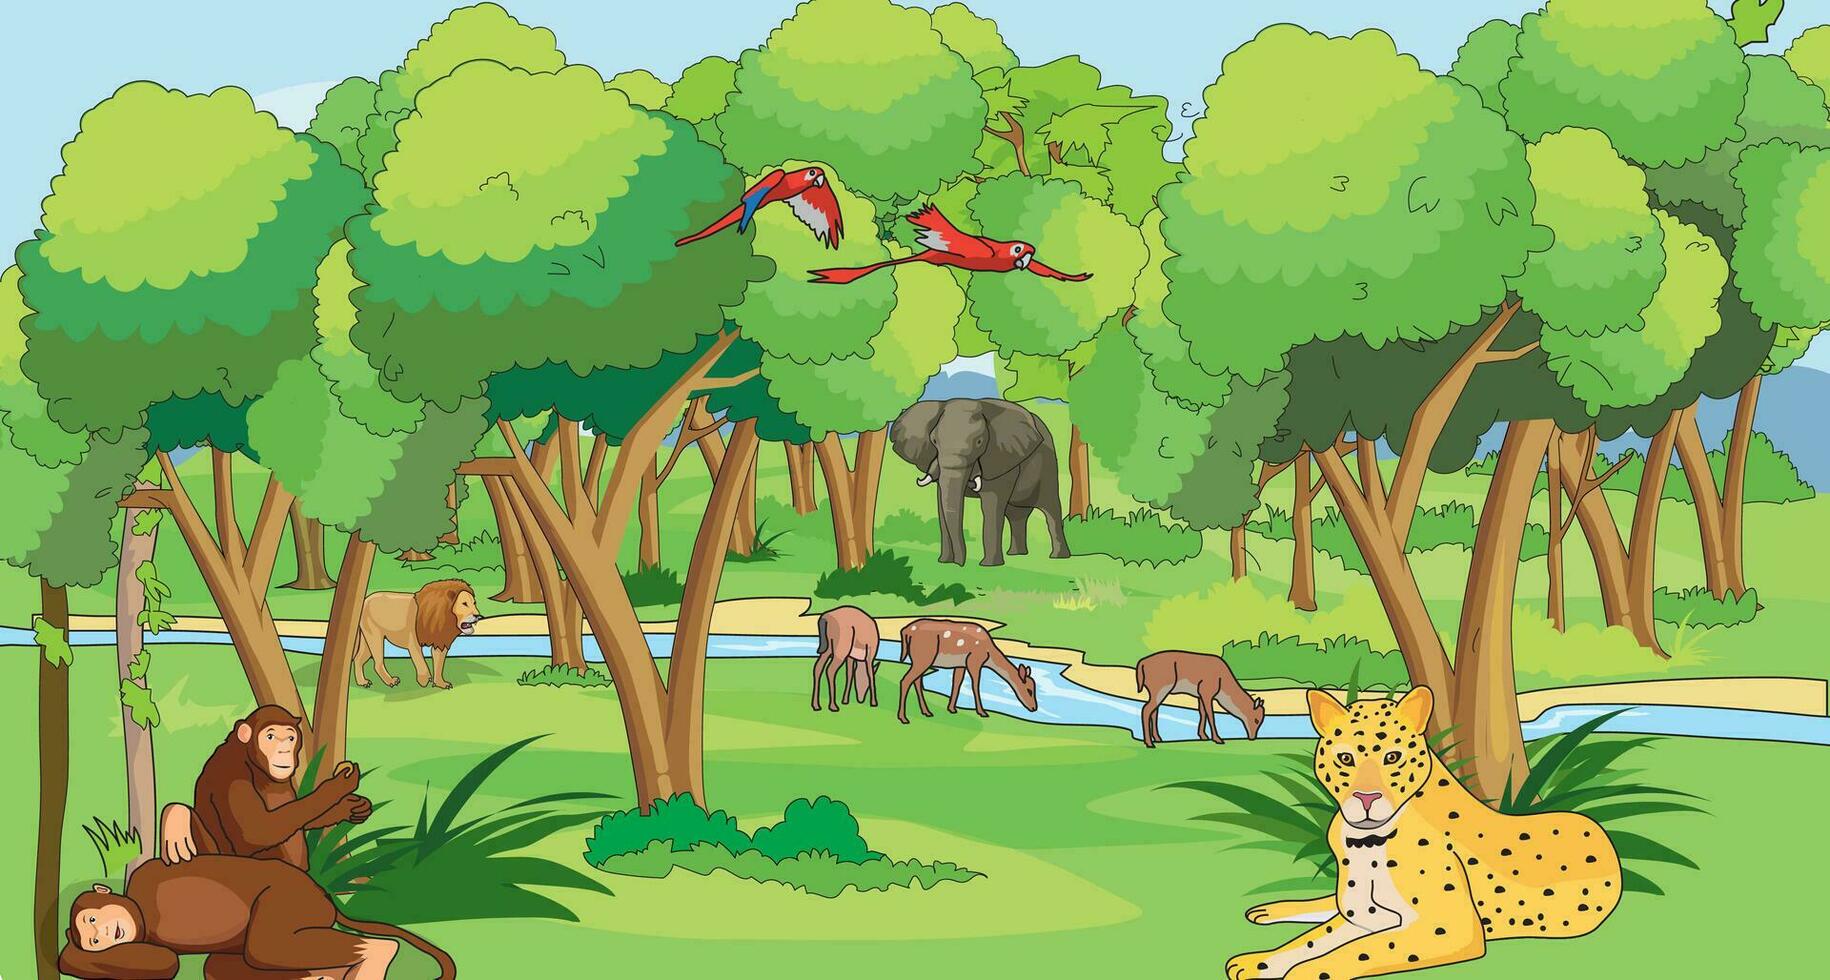 Forest illustration with birds and wild animals namely cheetah, lion, elephant, deer and chimpanzees vector